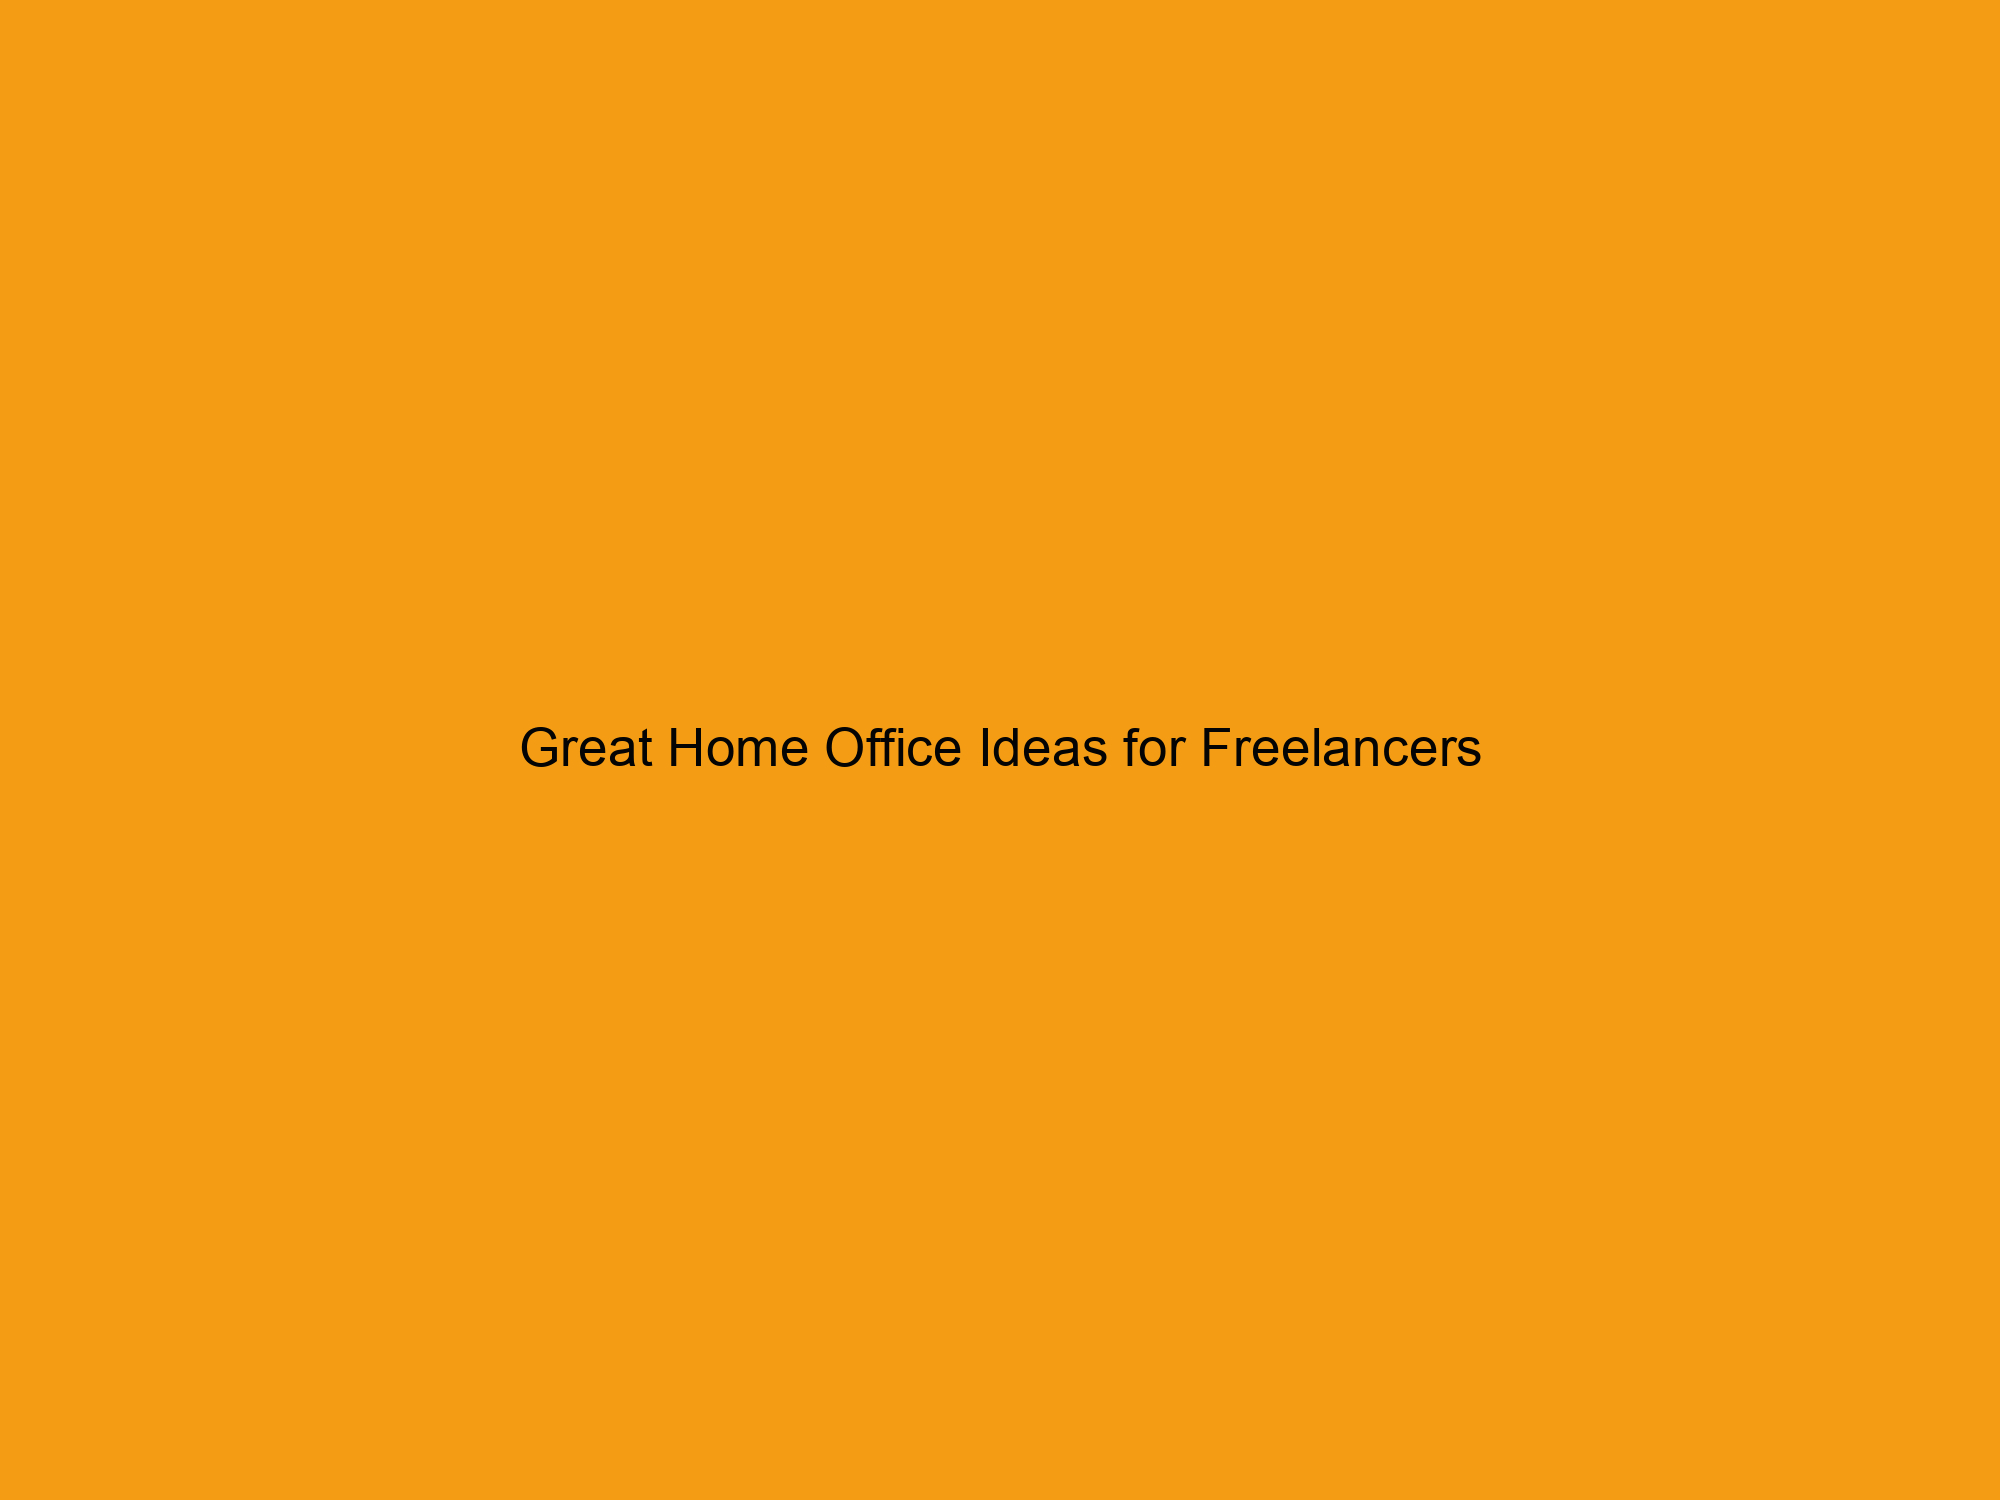 Great Home Office Ideas for Freelancers